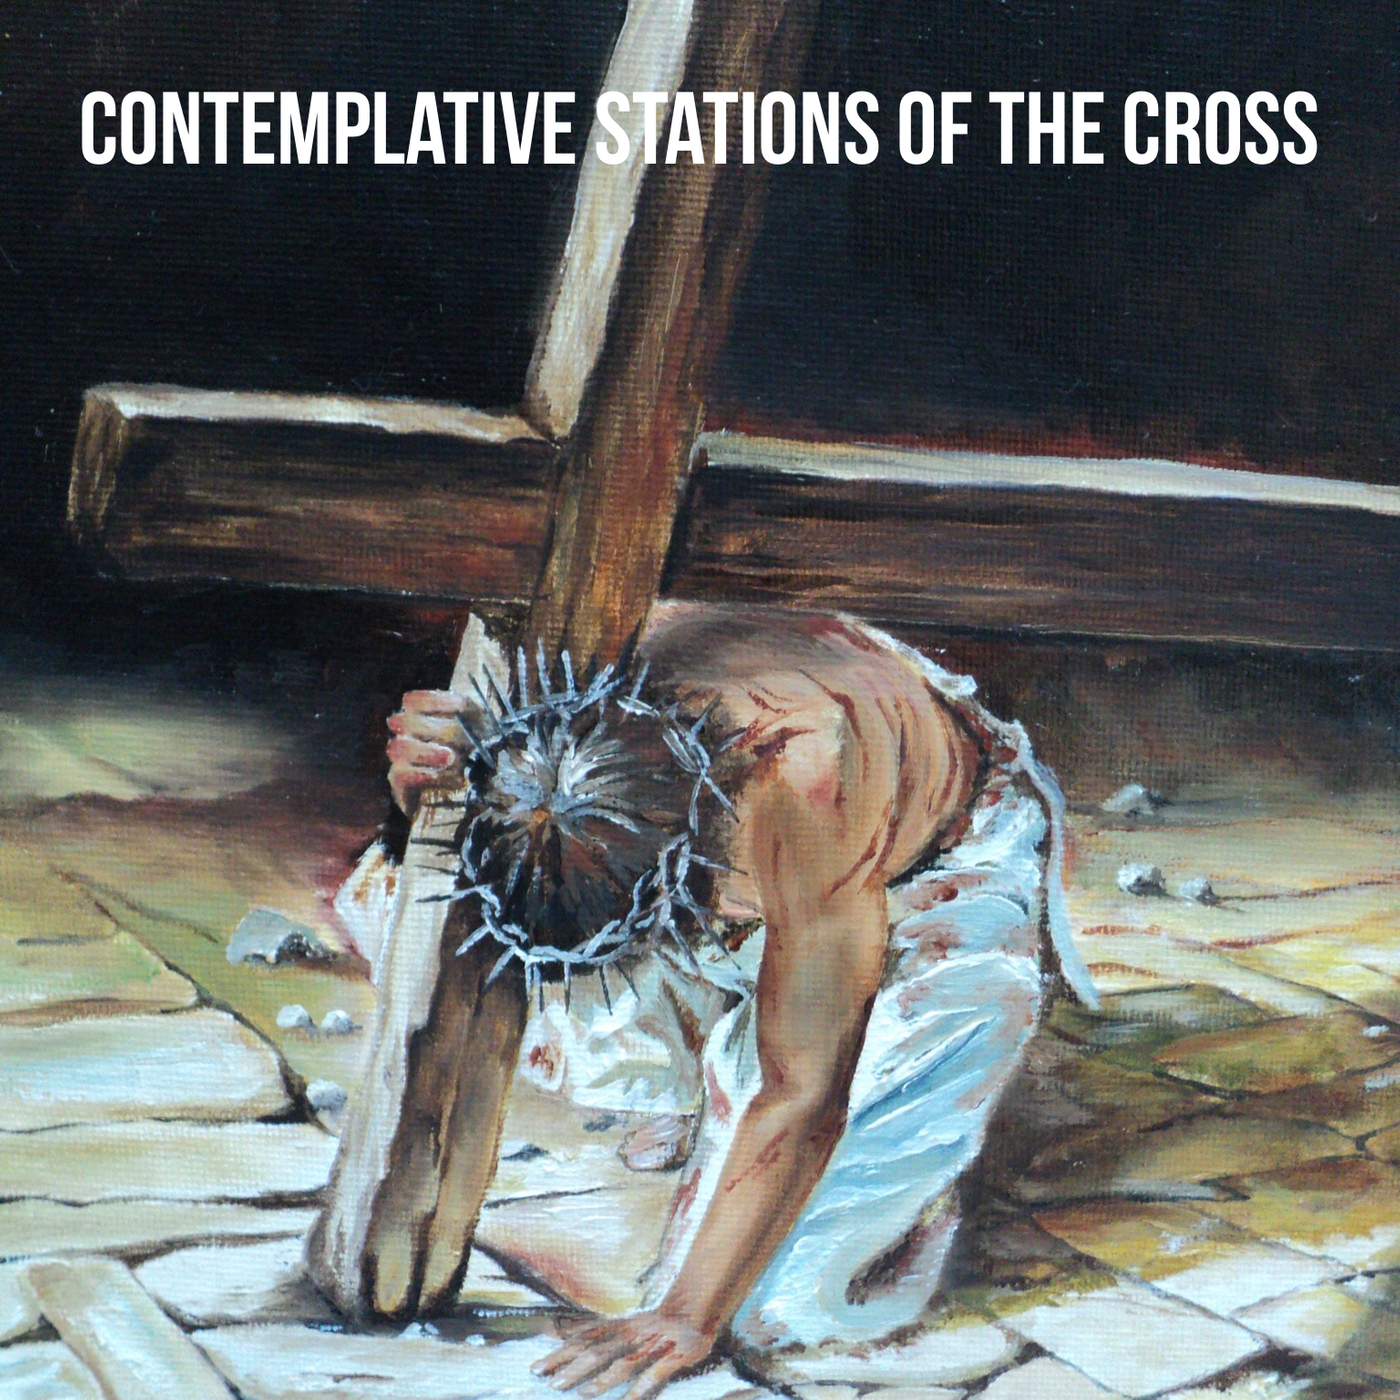 Contemplative Stations of the Cross